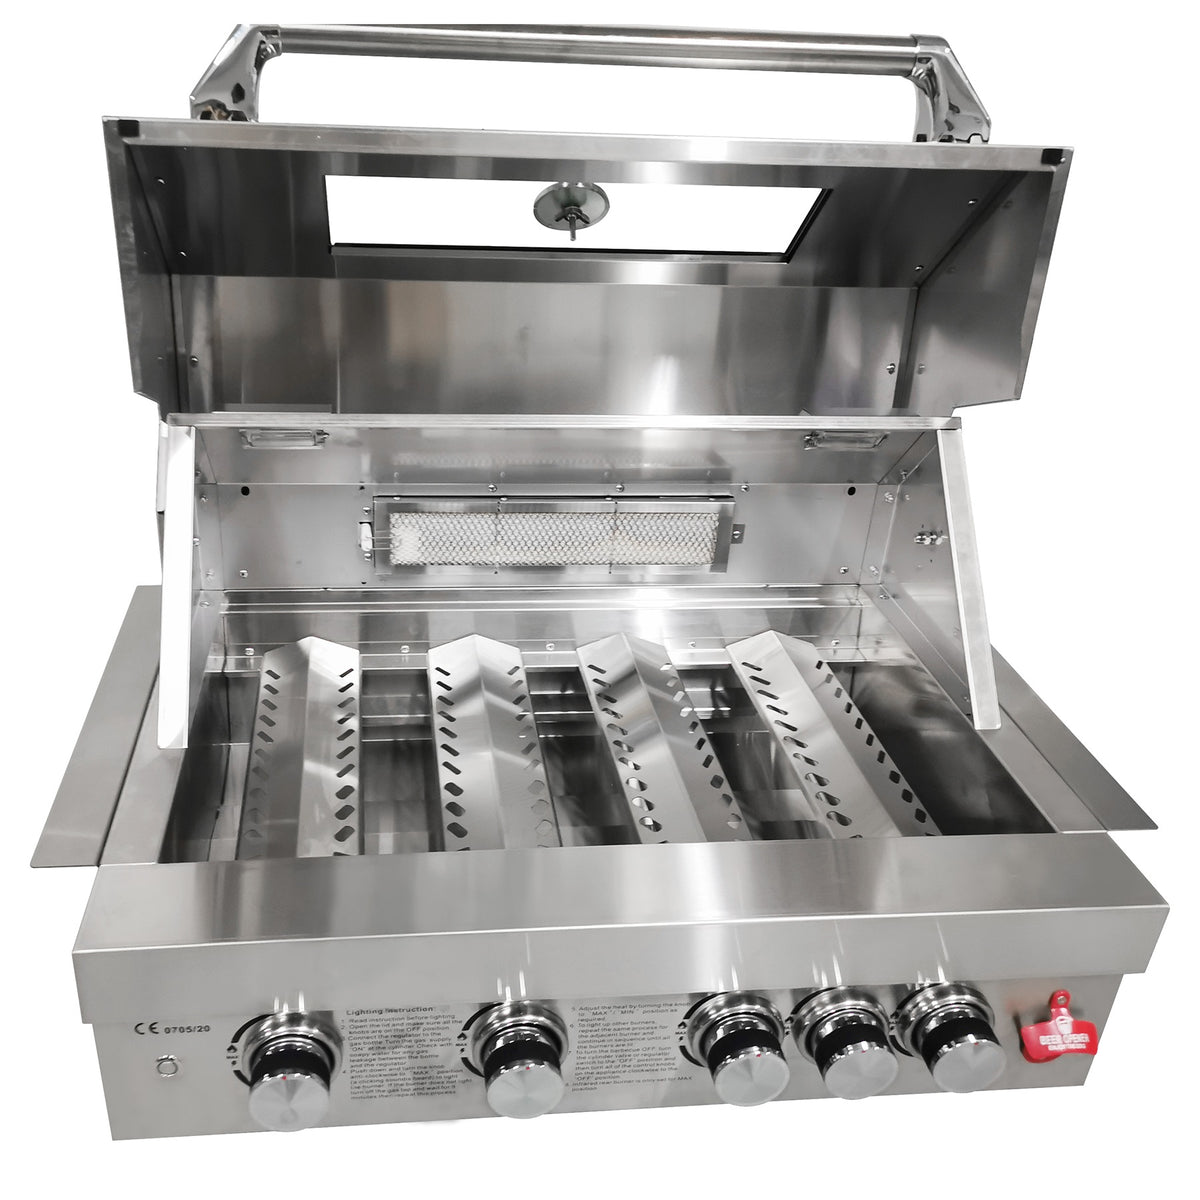 Draco Grills Z440B Deluxe 4 Burner Stainless Steel Build In Gas Barbecue